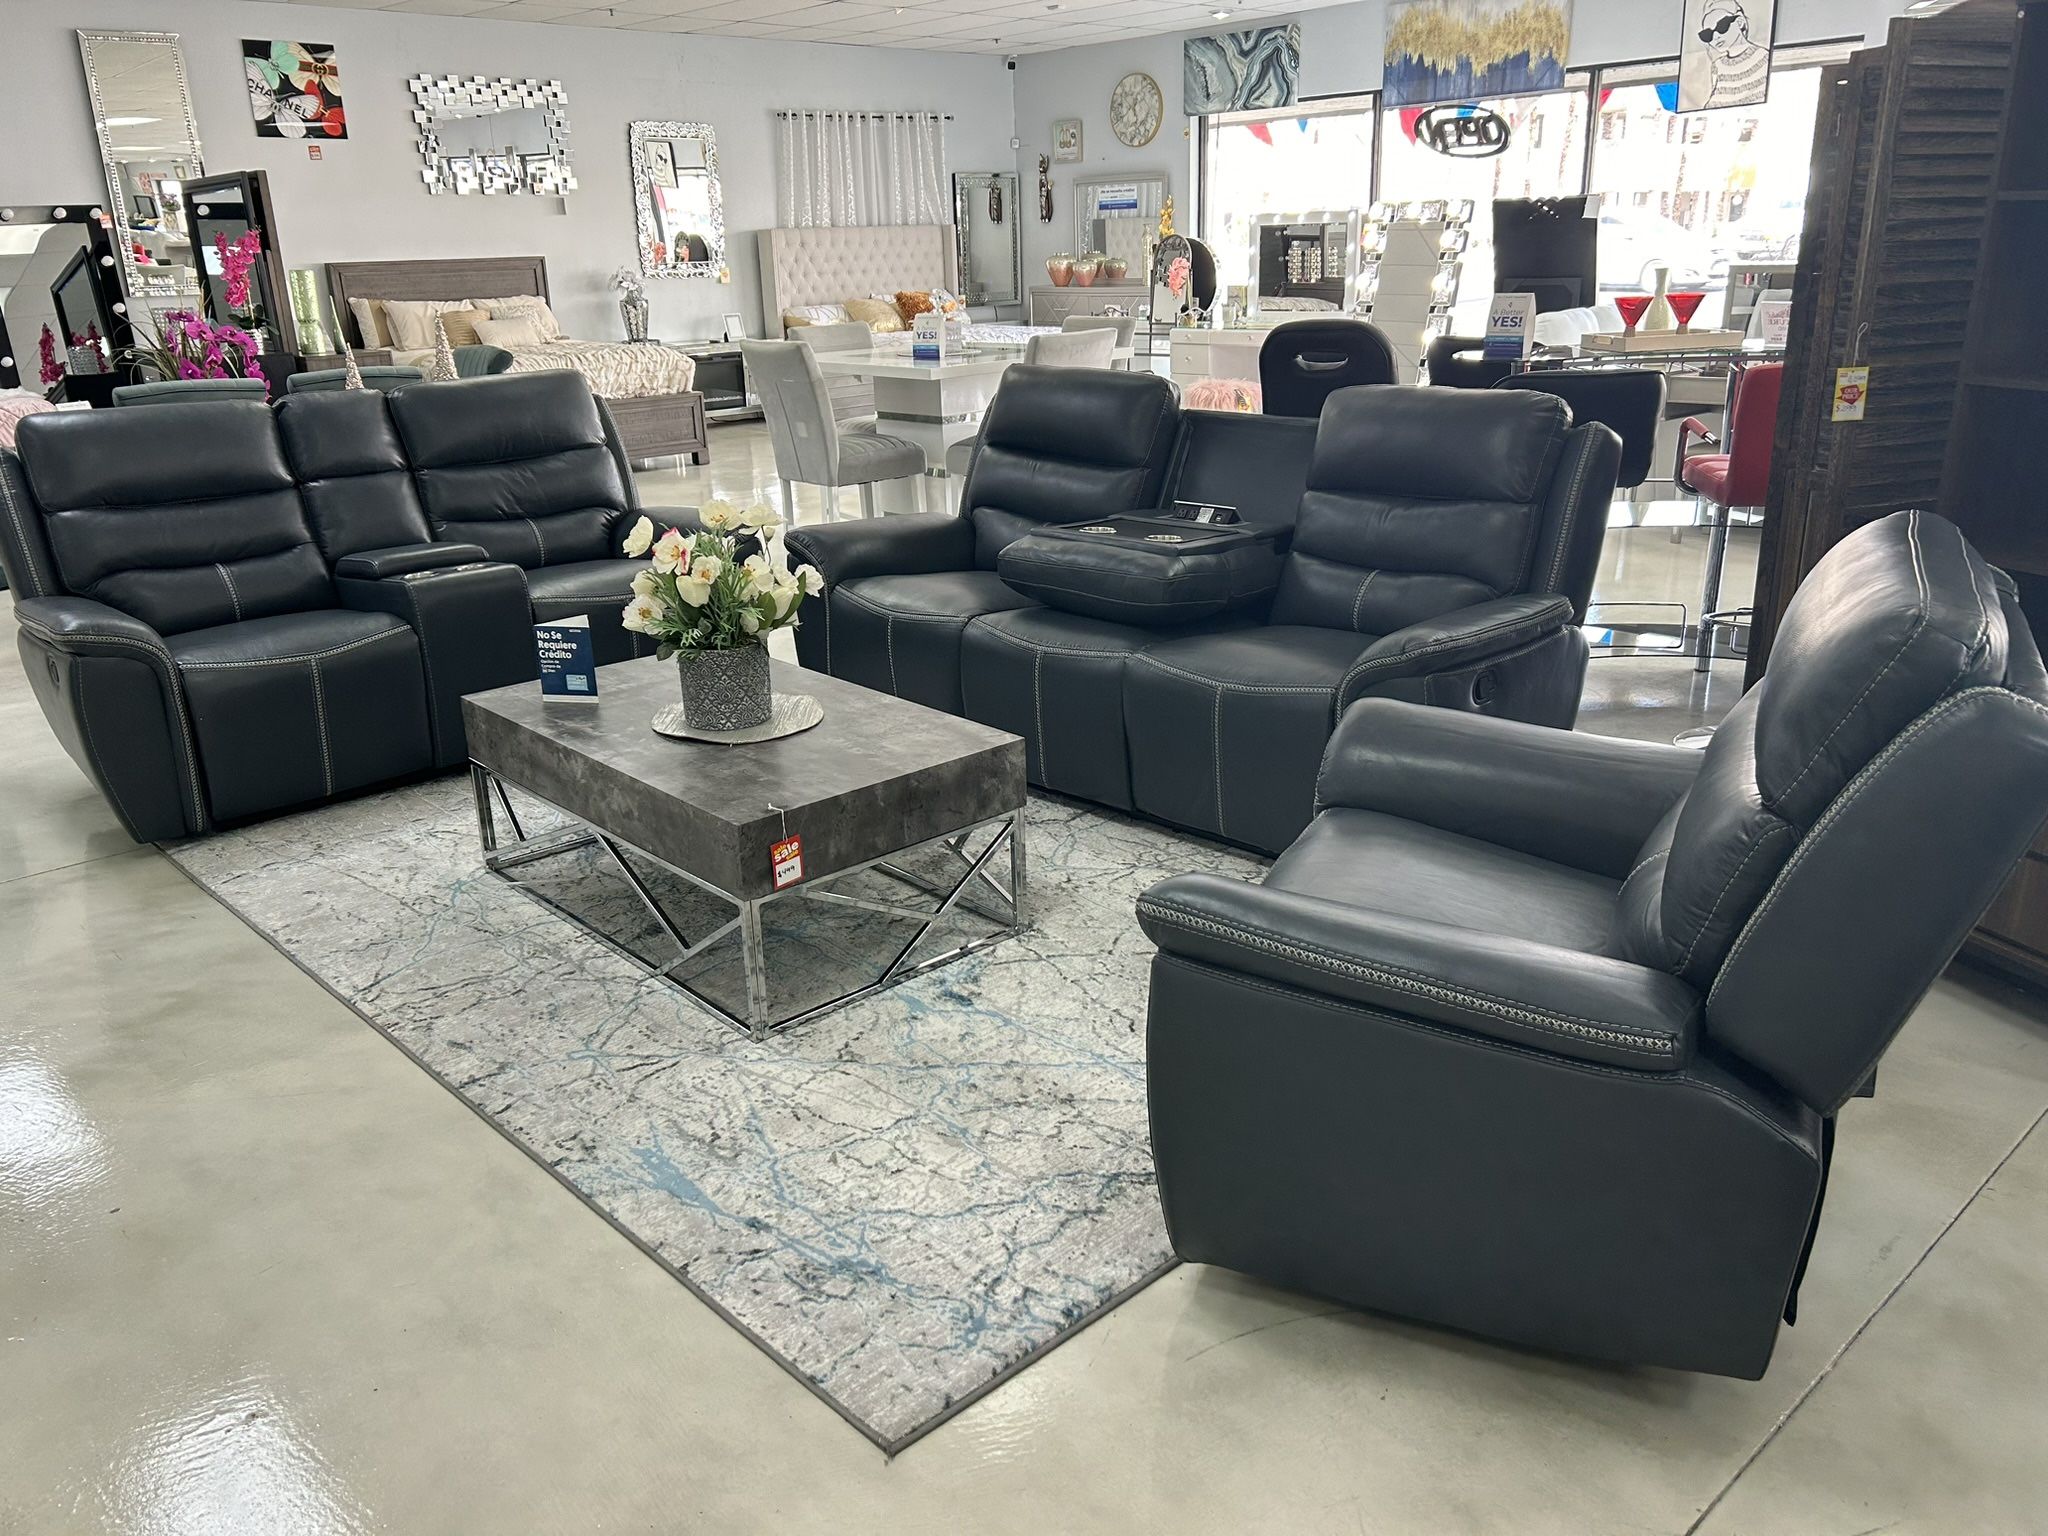 3PC Recliner Sofa Set (( Take It Home 🏠With $10 Down ))